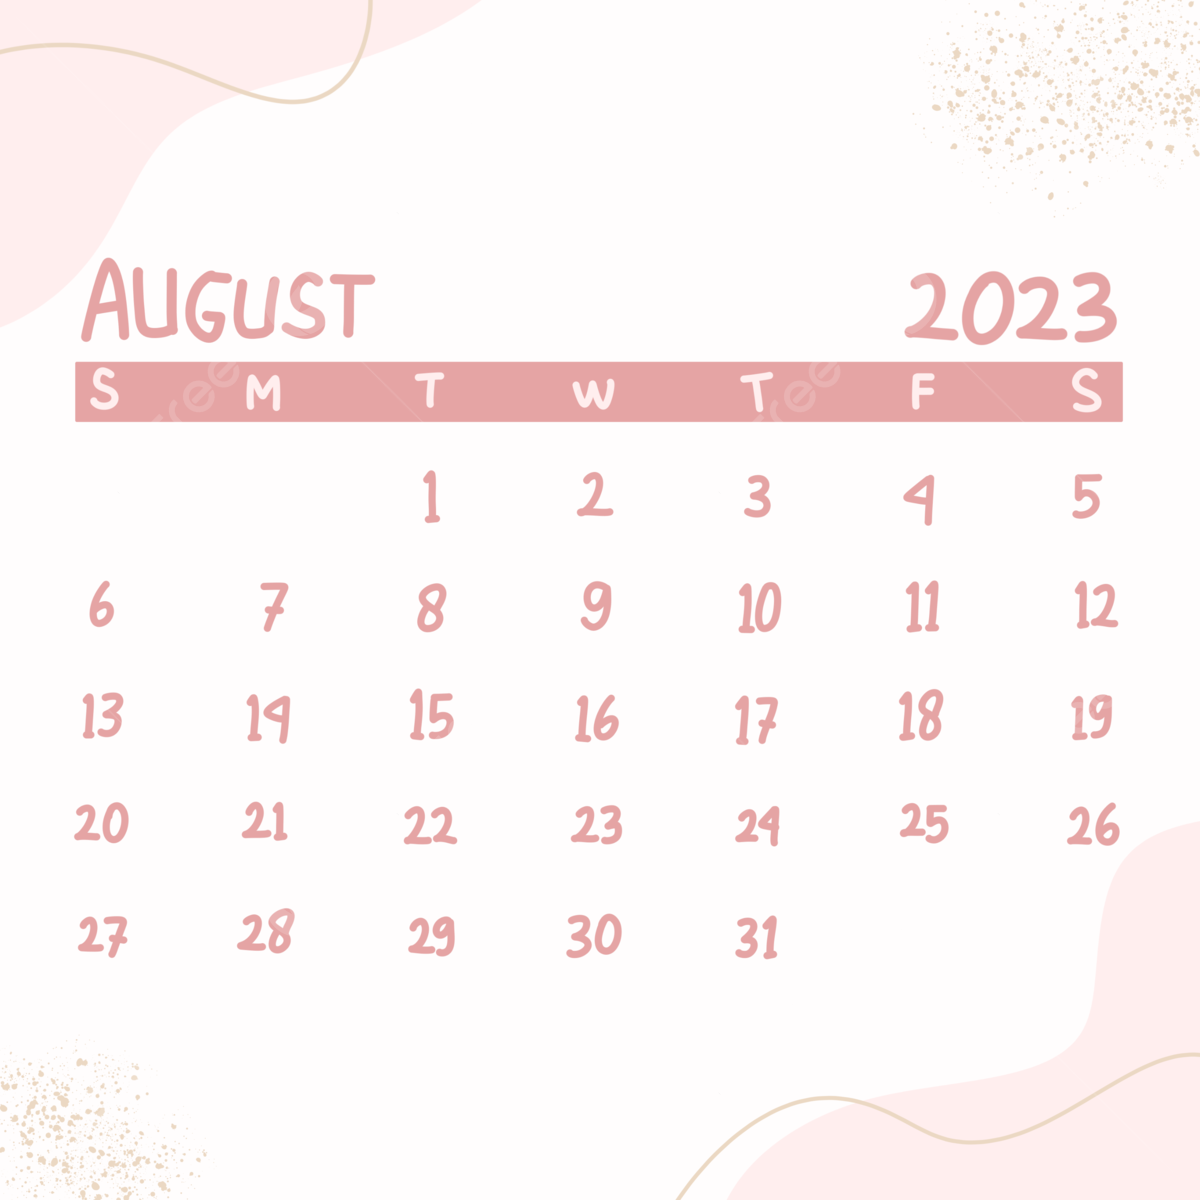 Calendar August With Aesthetic Background, August, Aesthetic, 2023 Background Image And Wallpaper for Free Download